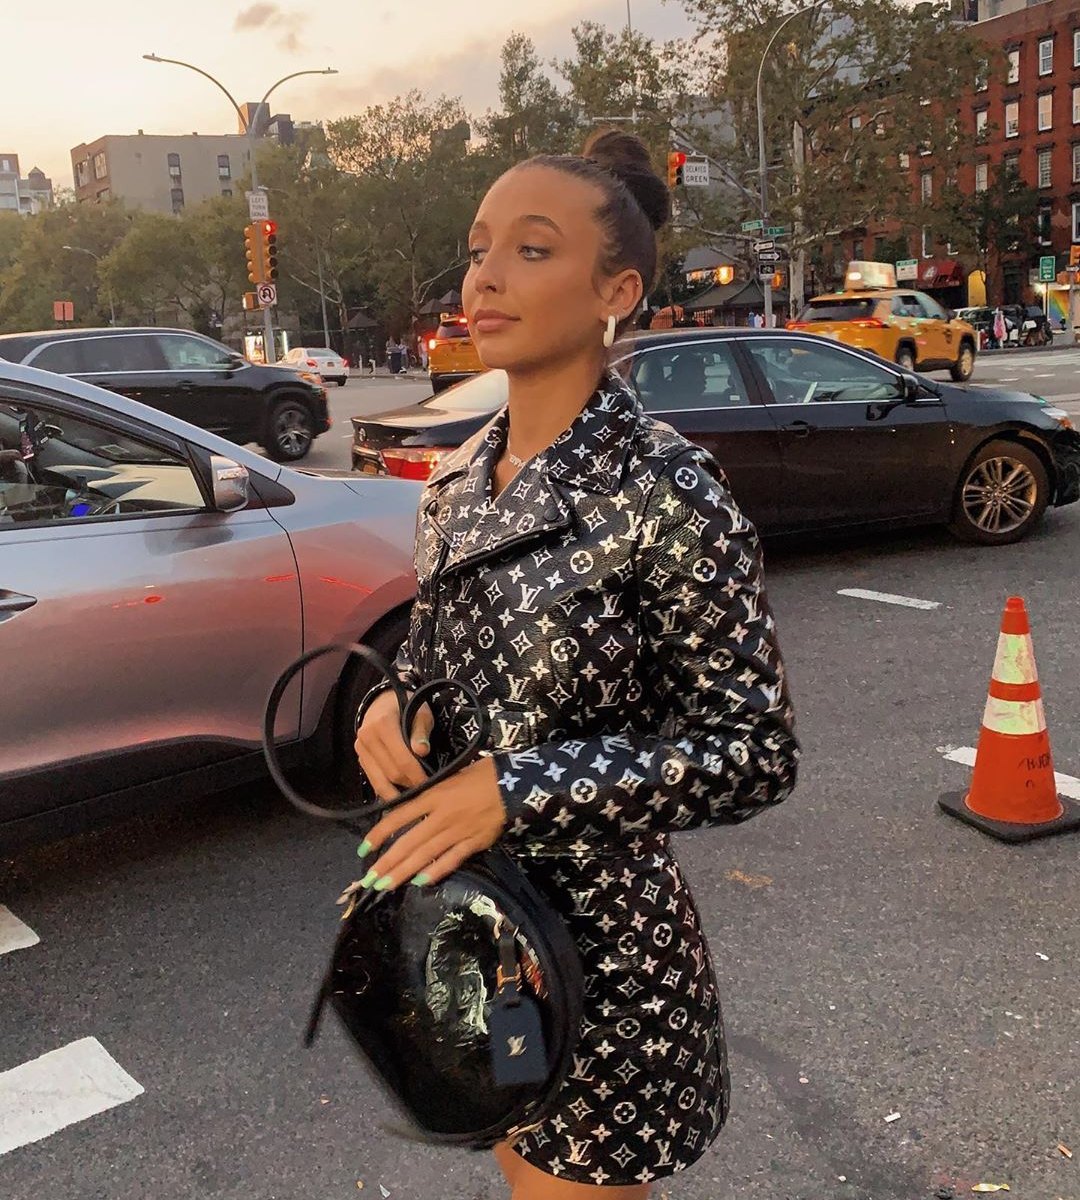 Emma Chamberlain's Style: See What the r Wore to NYFW